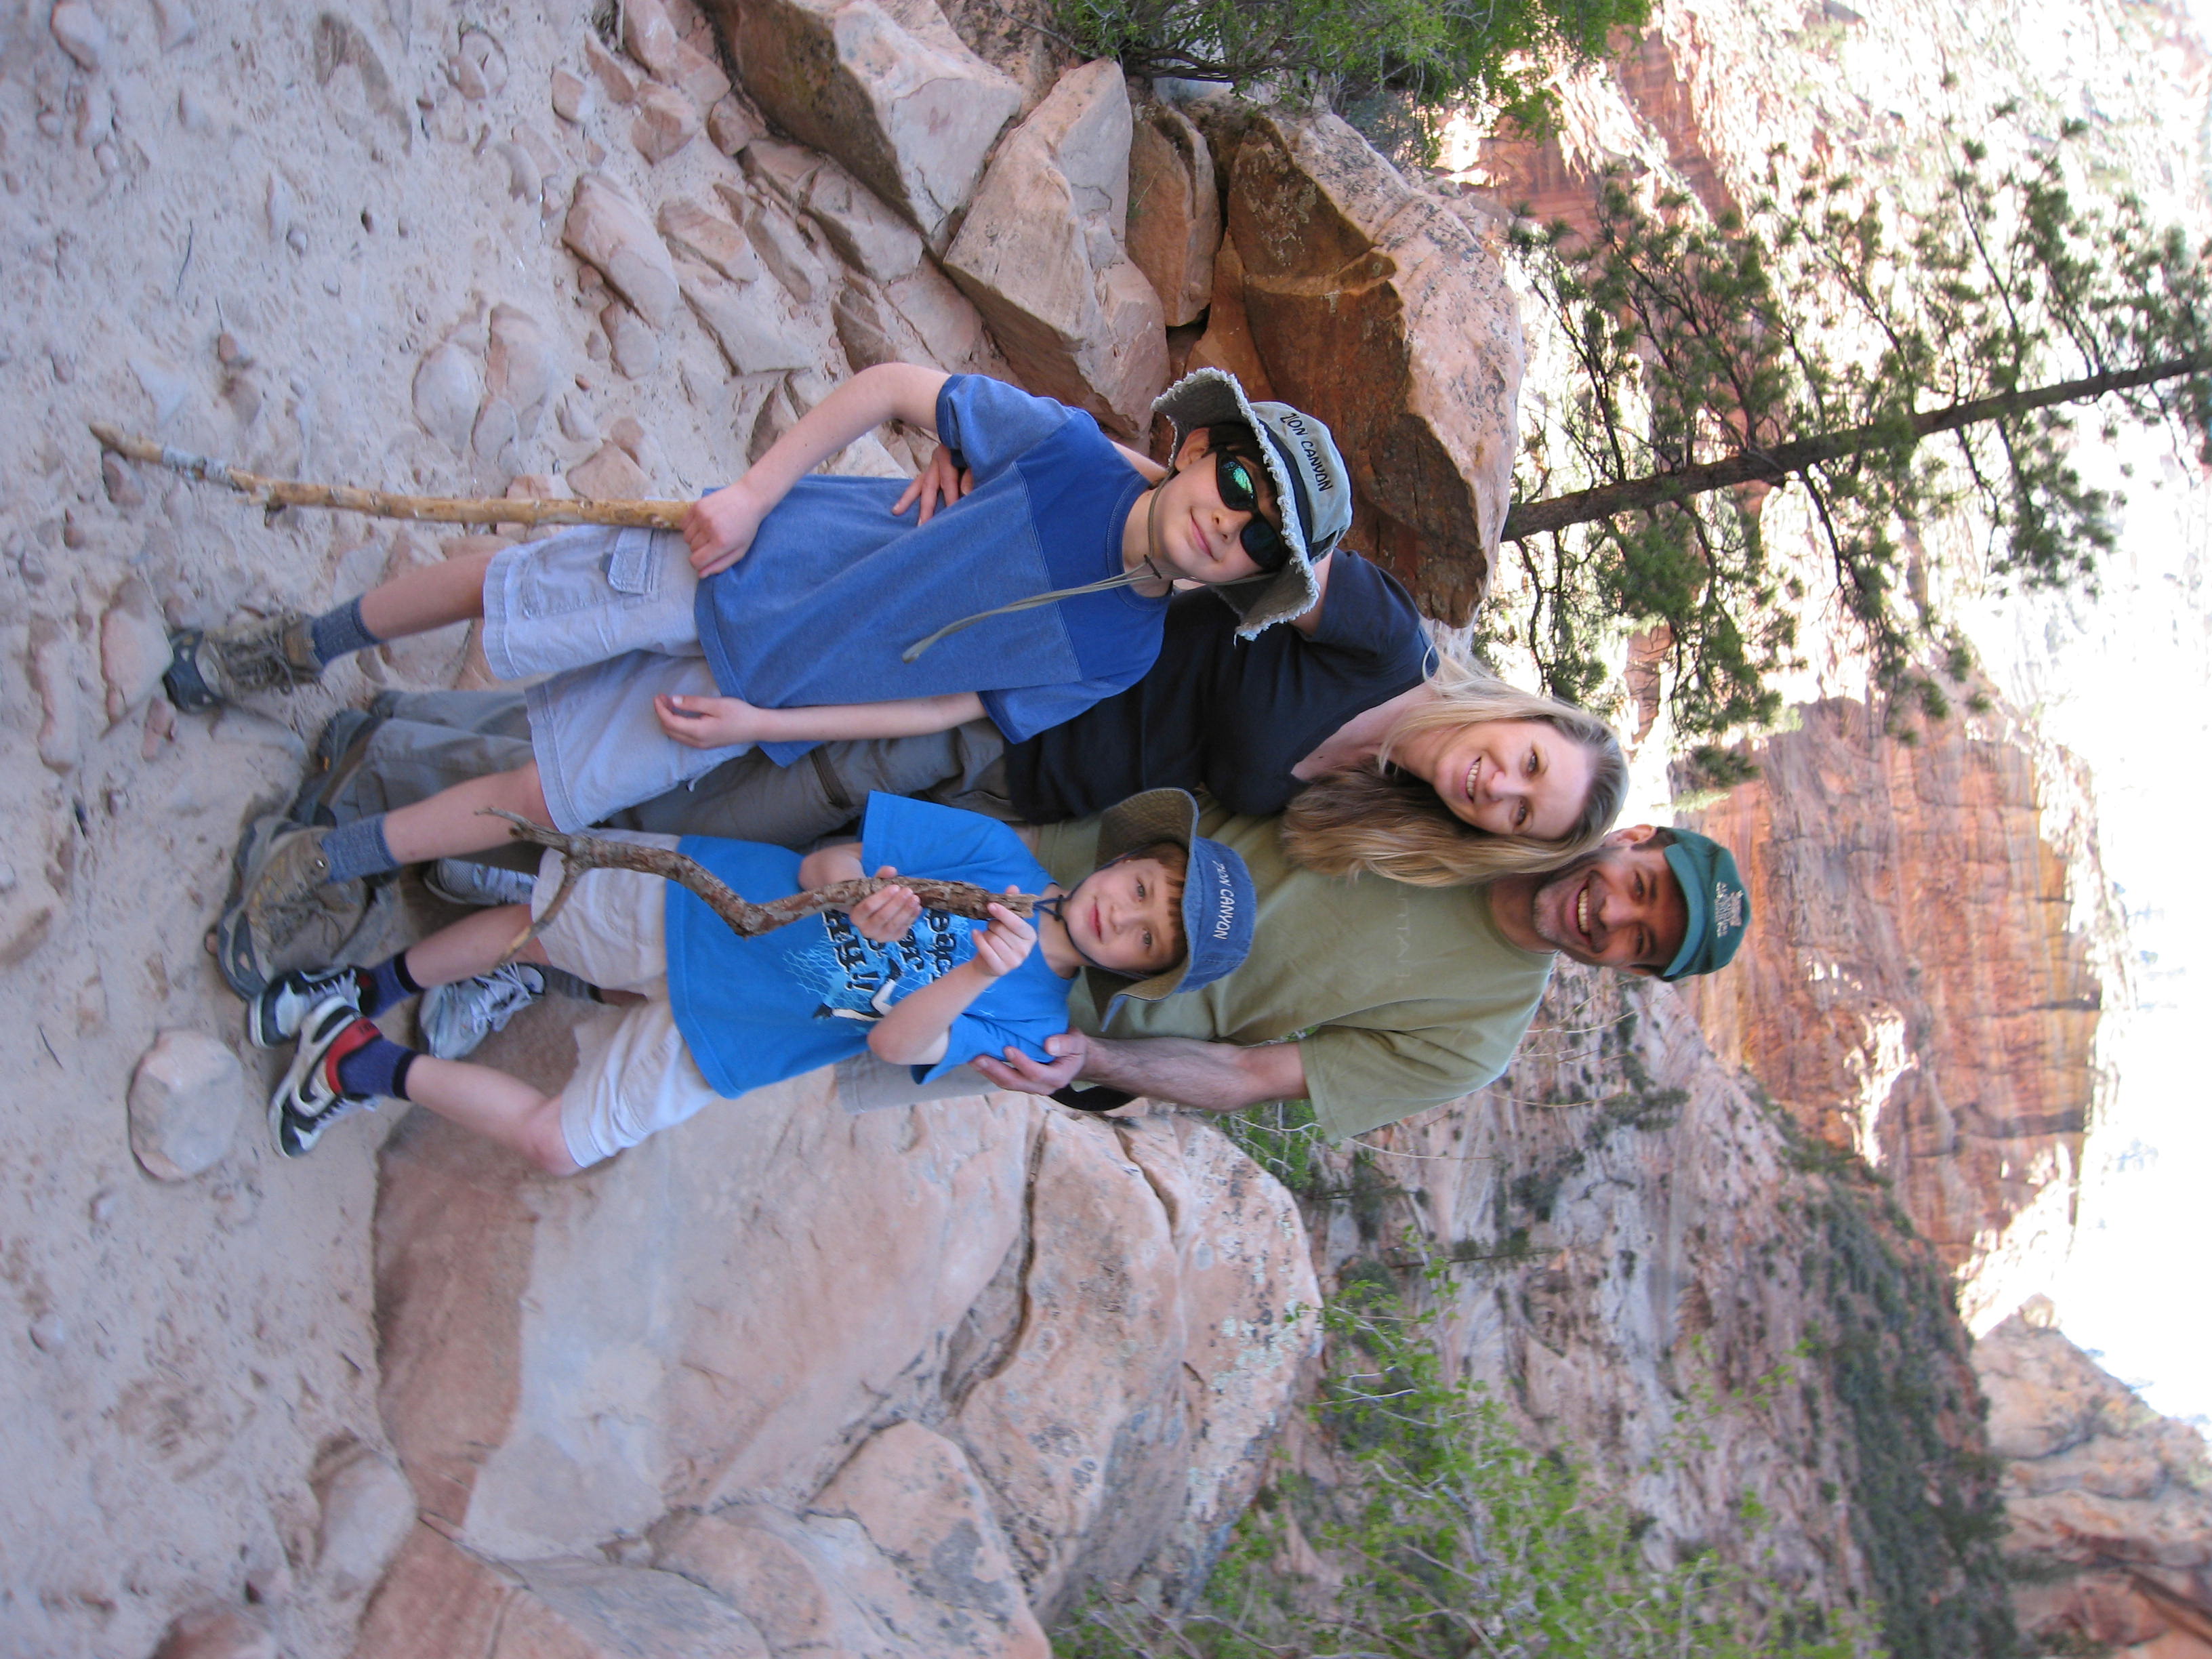 Dr. Petrovich and her family on one of their first visits to Zion National Park in Utah. They have returned several times over the years.